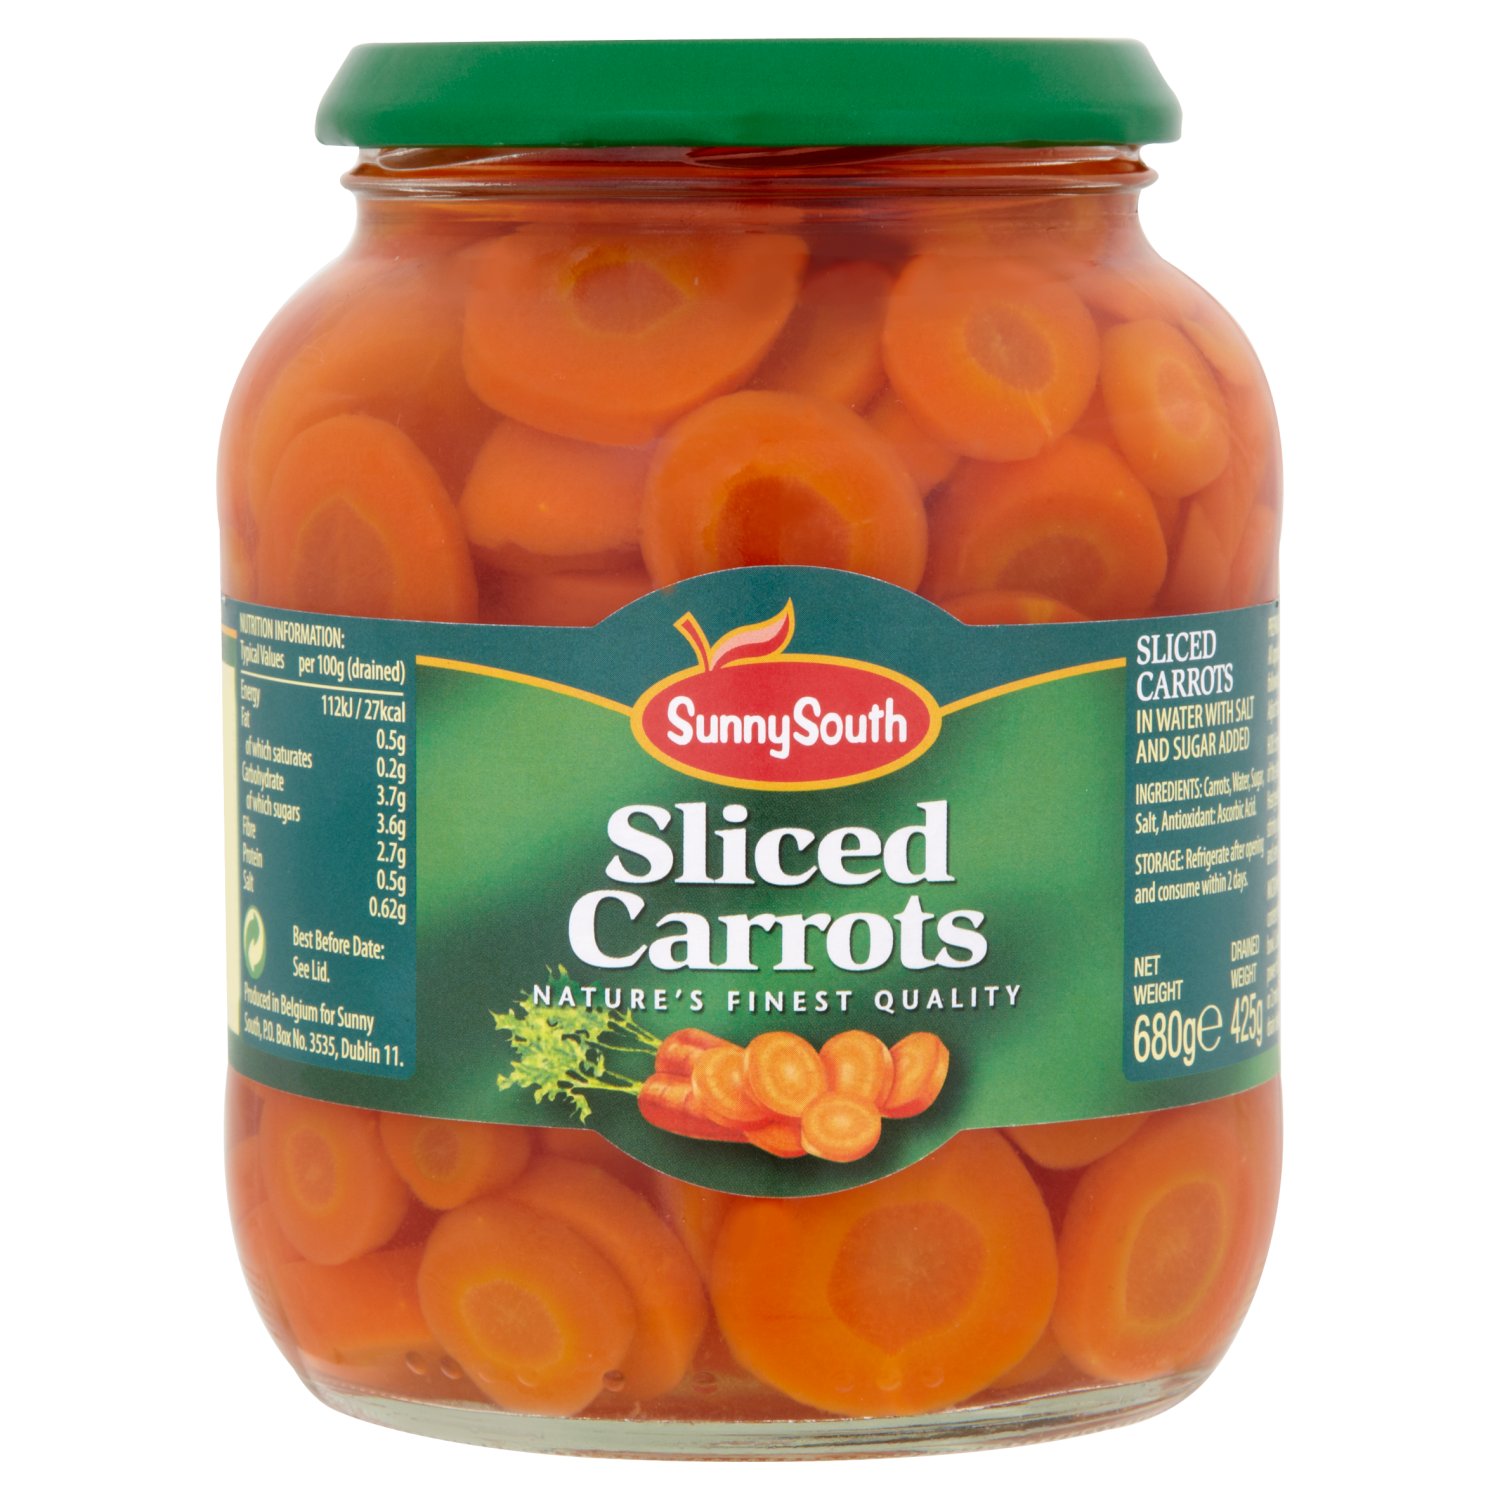 Sunny South Sliced Carrots In Jars (680 g)